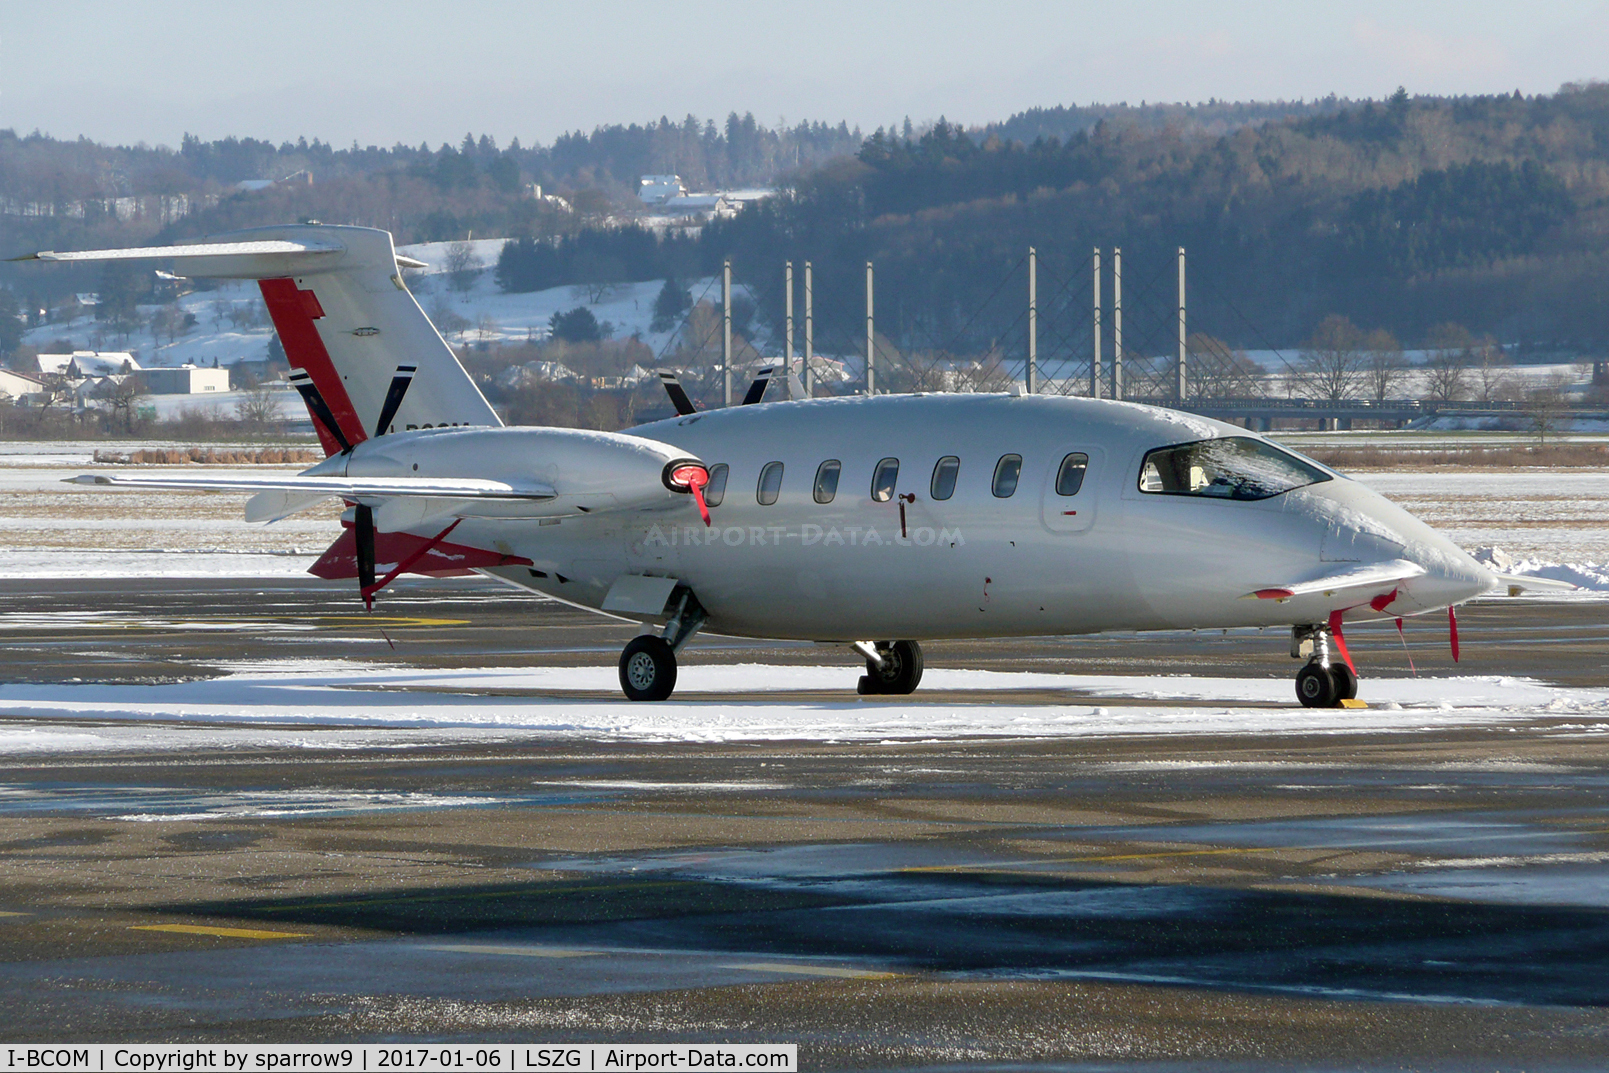 I-BCOM, 2000 Piaggio P-180 Avanti C/N 1040, waiting for work to be done before new registration